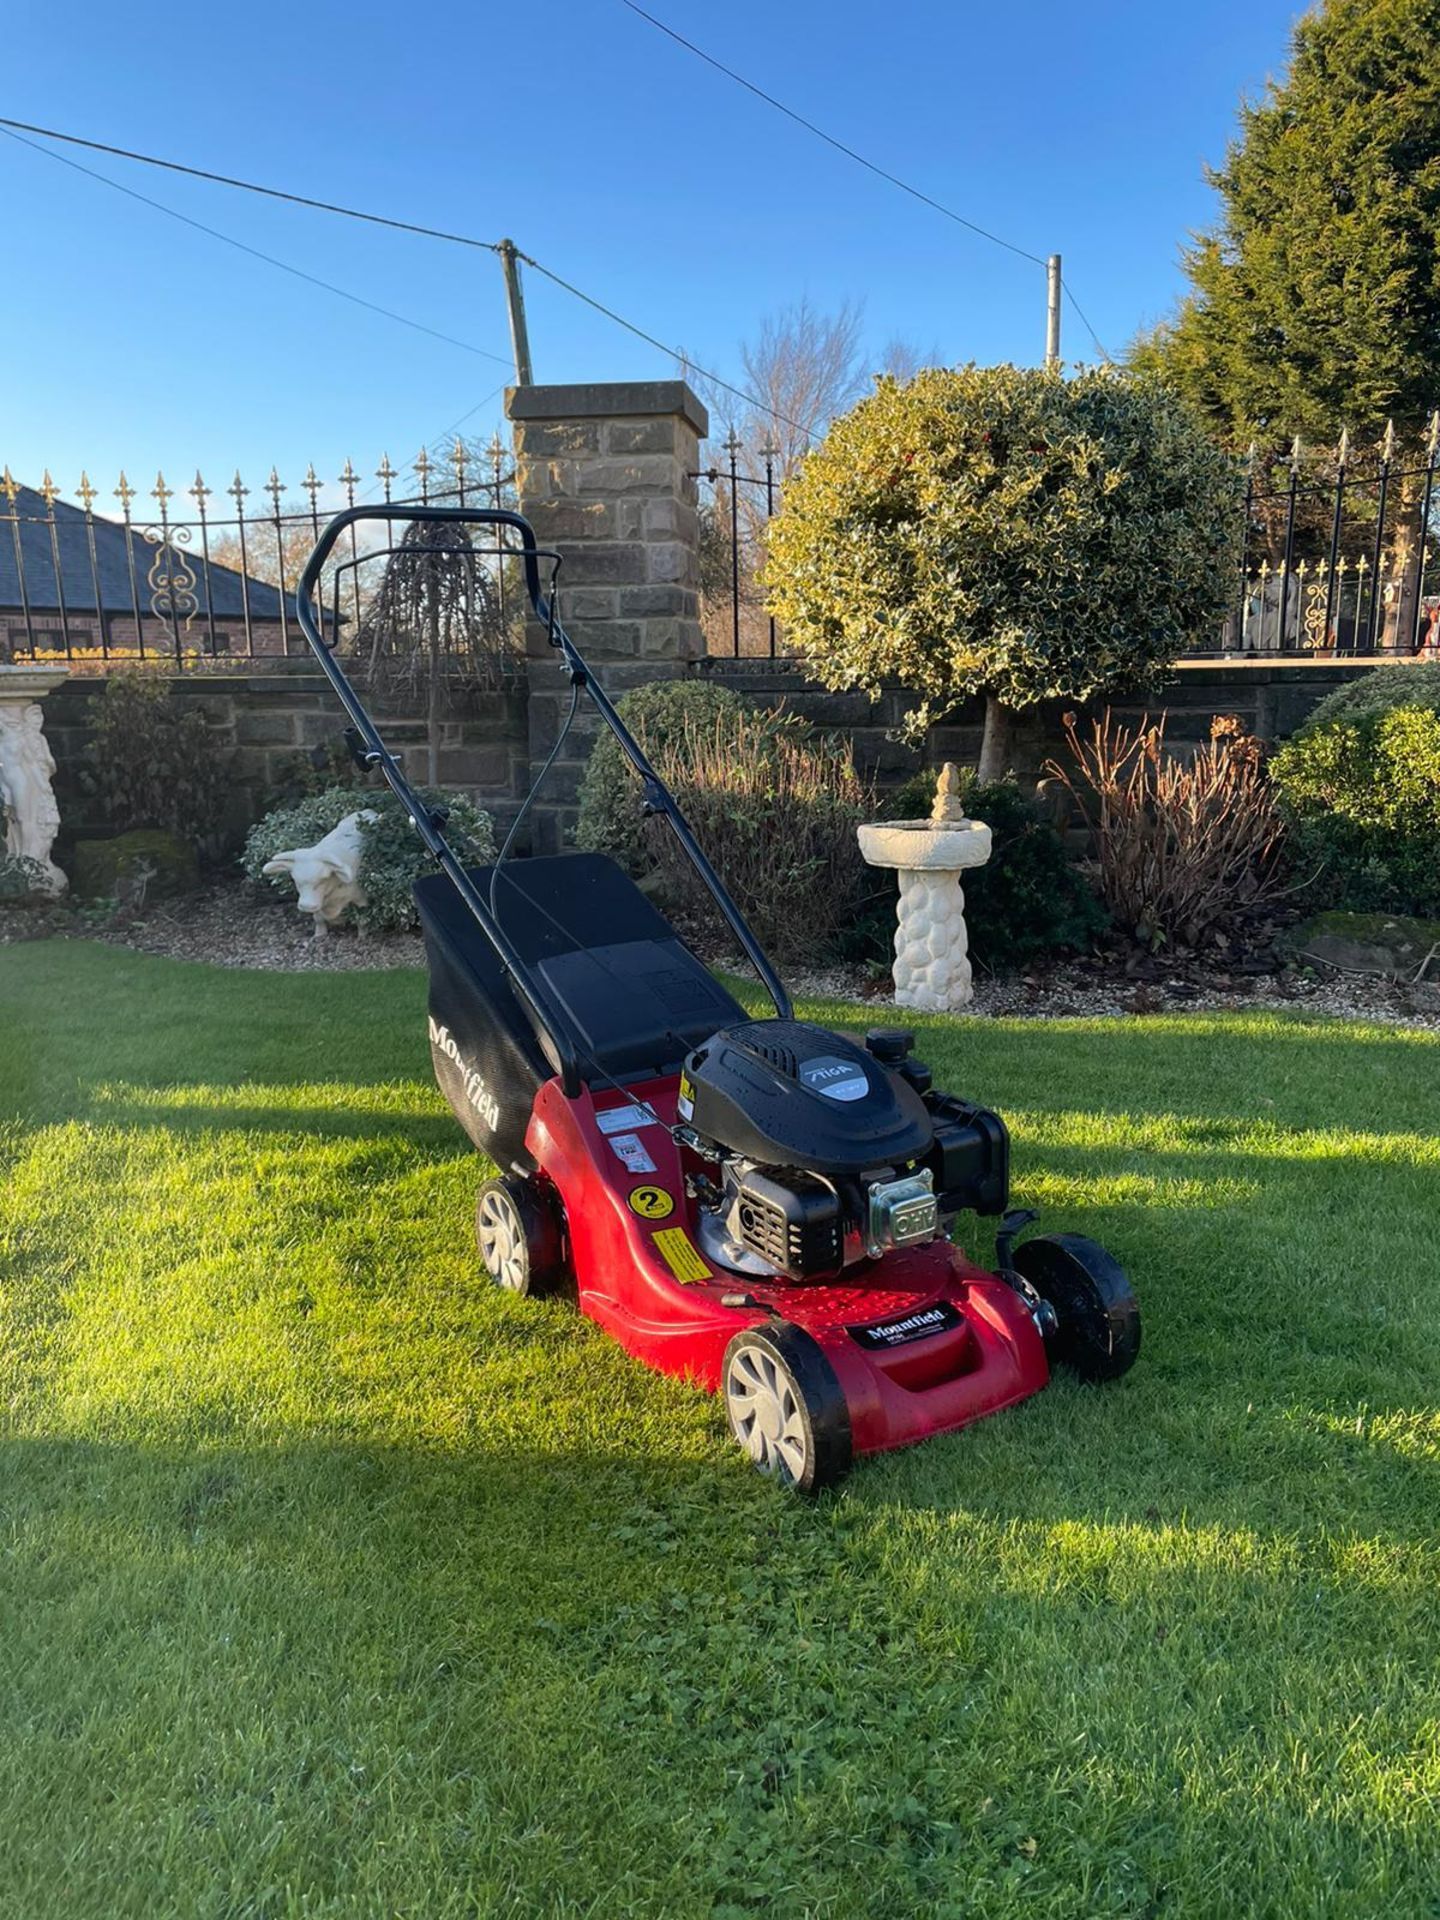 NEW AND UNUSED 2021 MOUNTFIELD EP 414 PUSH LAWN MOWER, FULLY ASSEMBLED *NO VAT* - Image 2 of 5